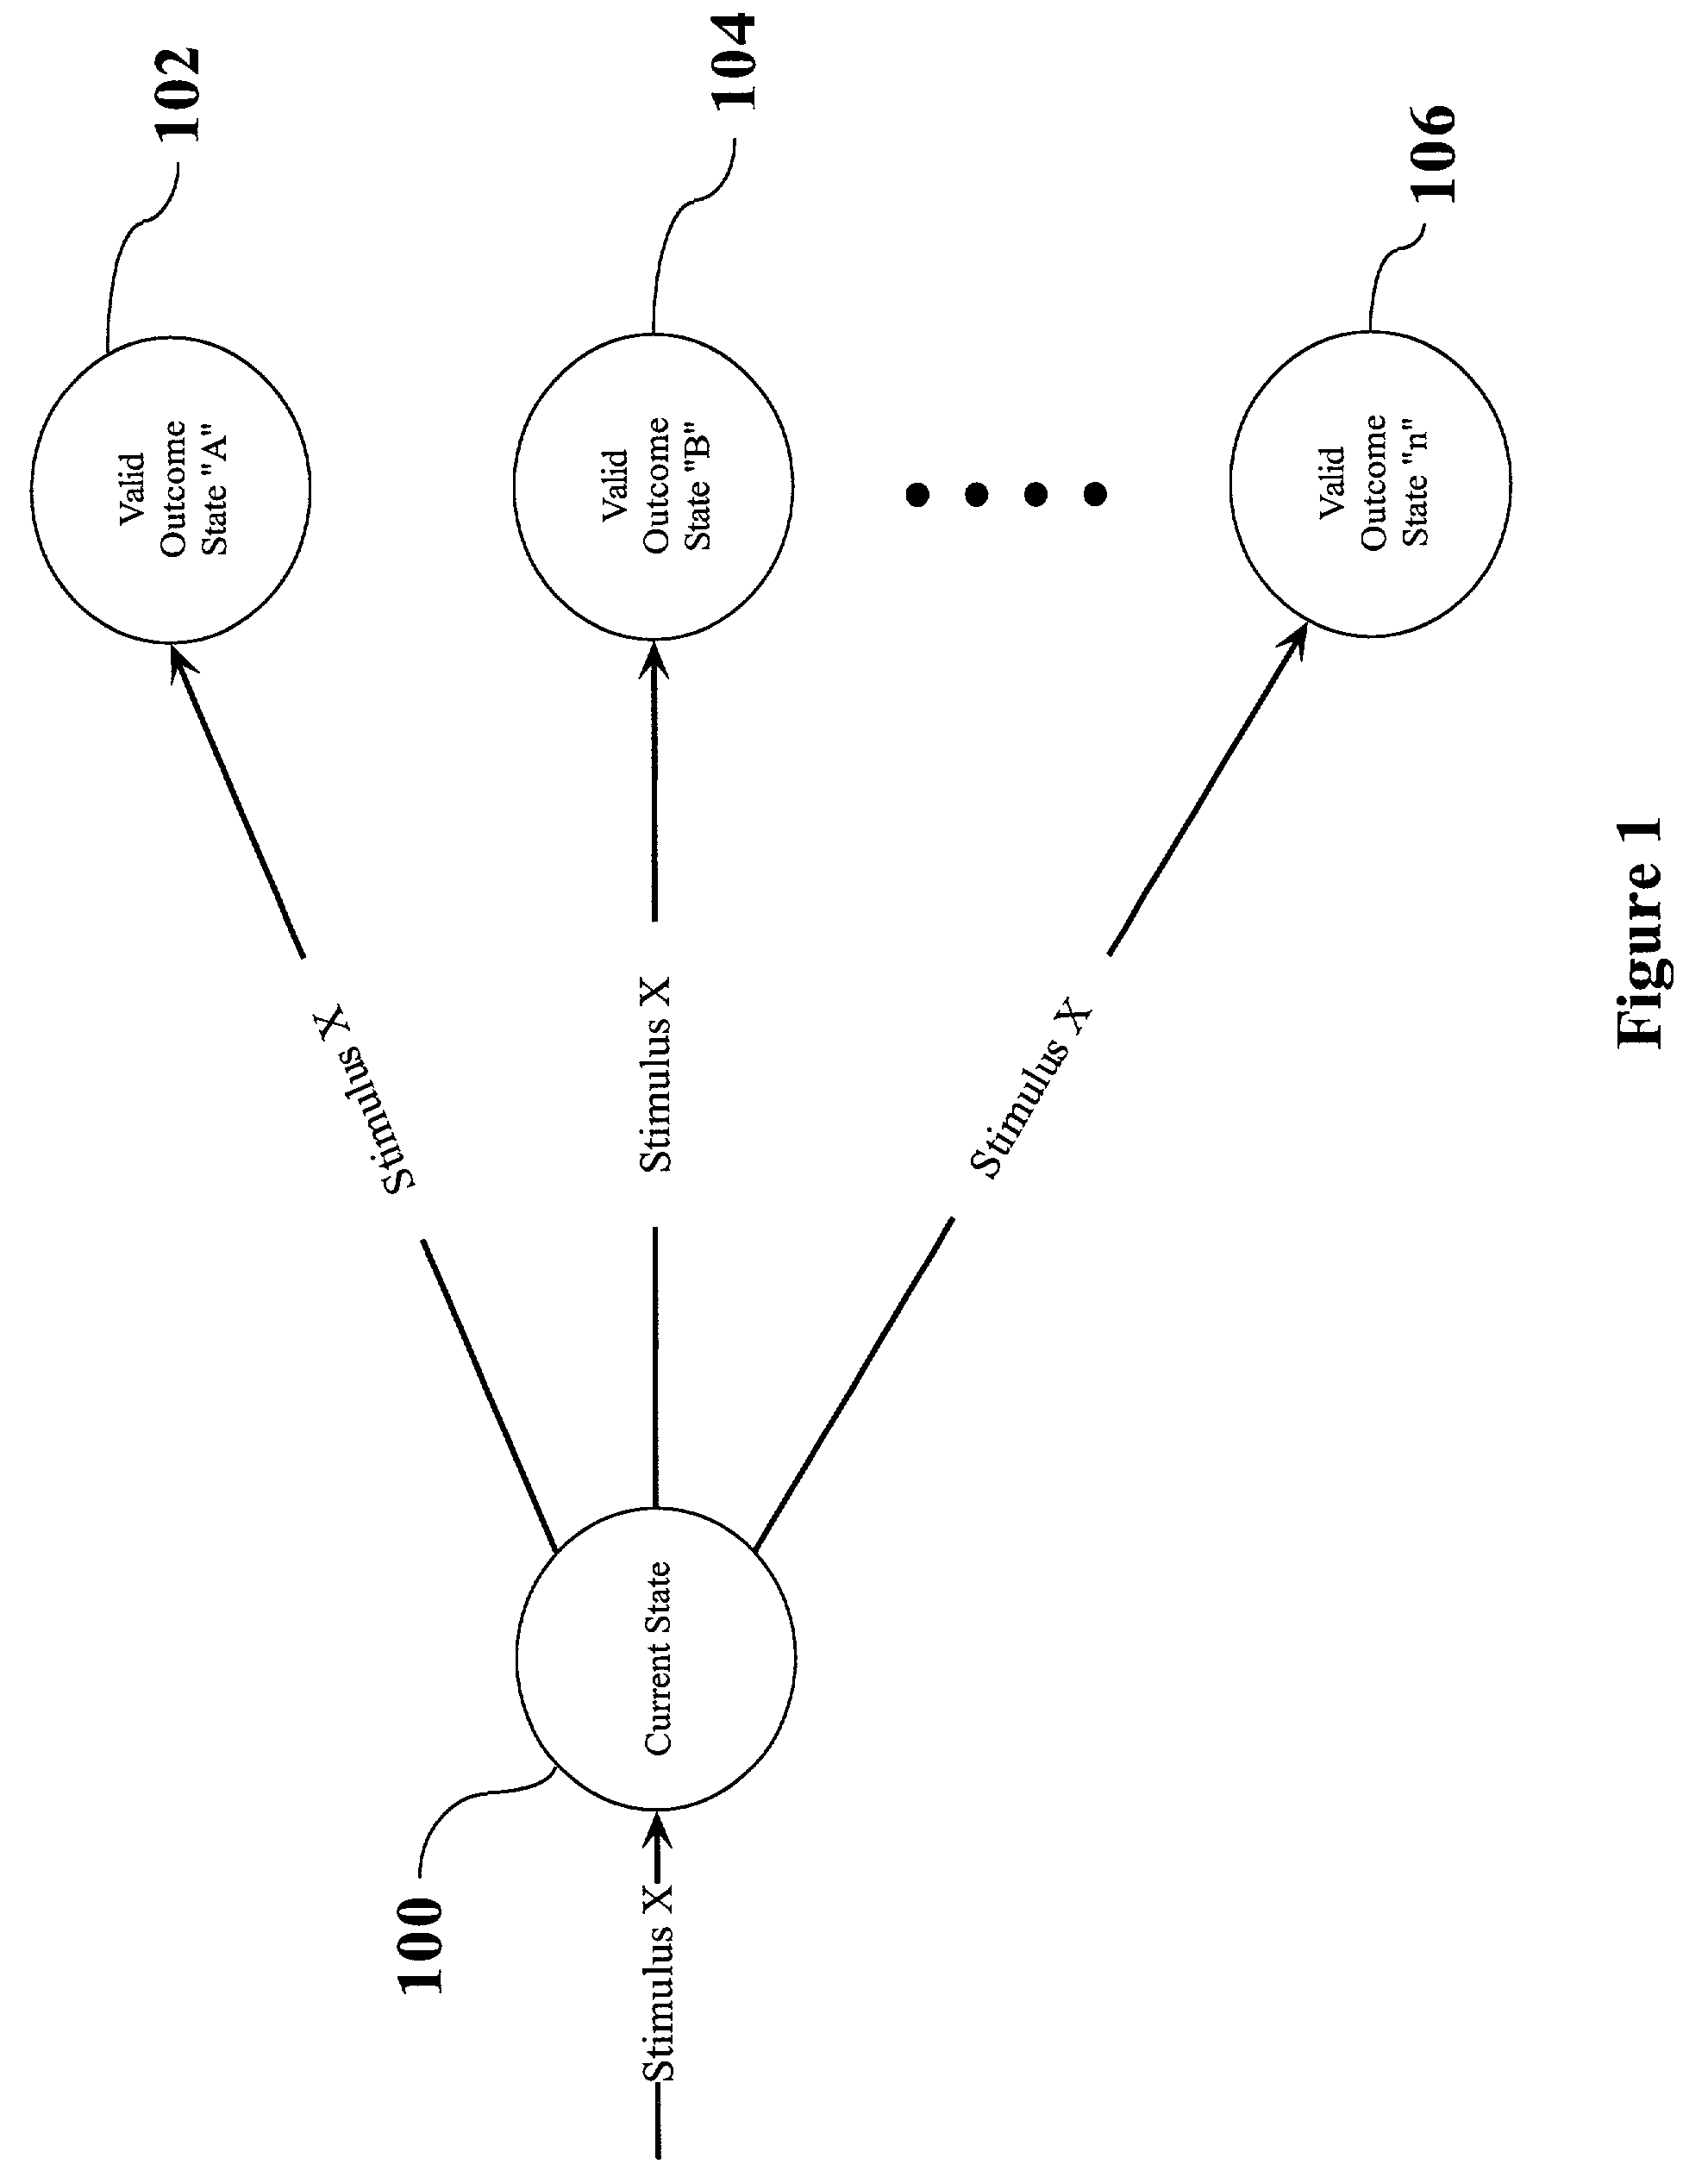 Method, system, and computer program product for automated test generation for non-deterministic software using state transition rules